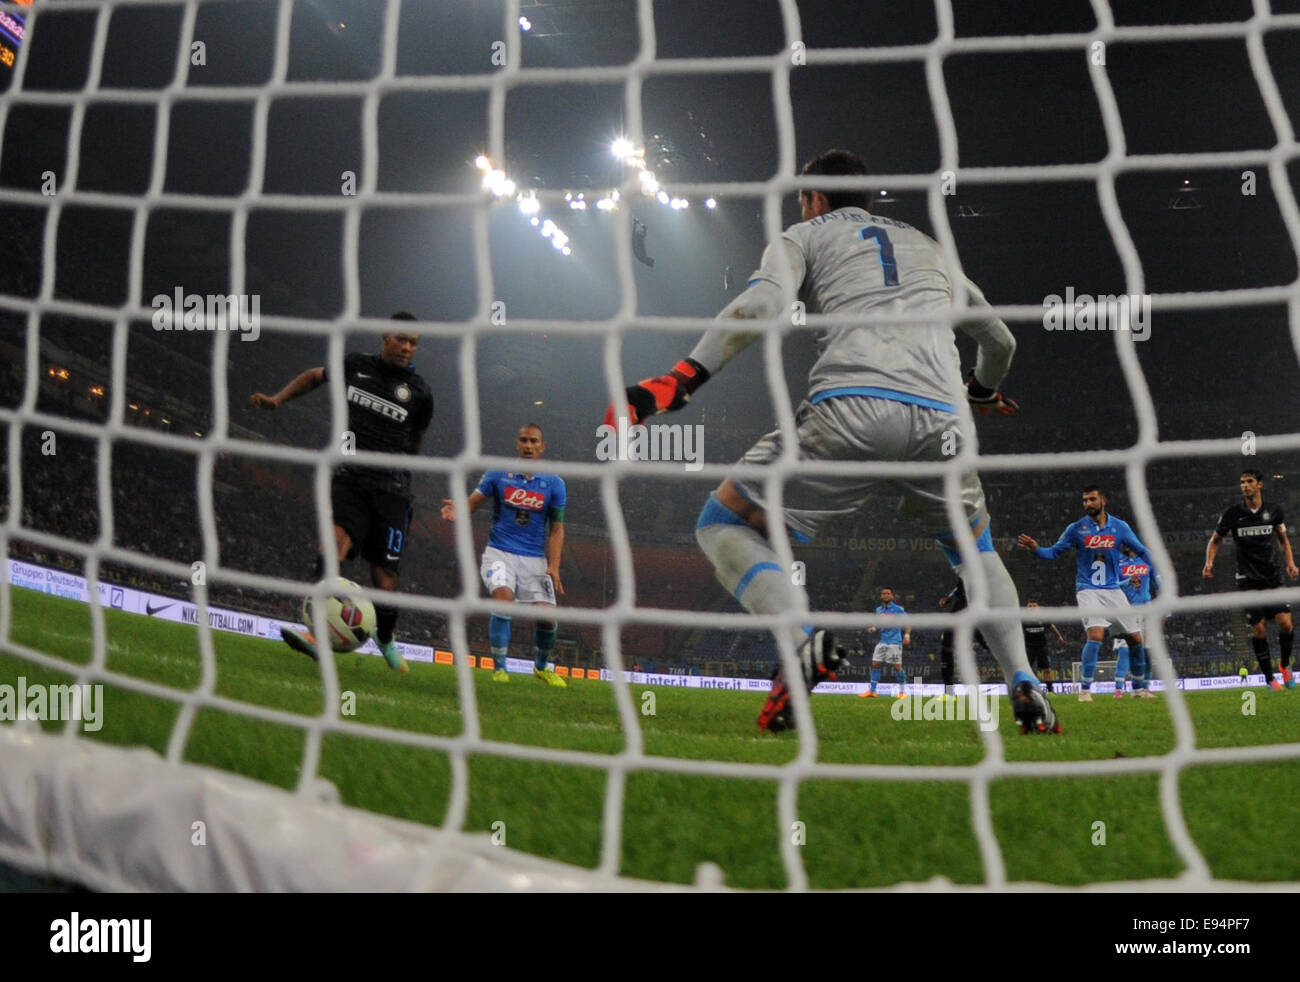 (141020) -- MILAN, Oct. 20, 2014(Xinhua) -- Inter Milan's Fredy Guarin (L) shoots during the Serie A football match between Inter Milan and Naples at the San Siro Stadium in Milan, Italy, Oct. 19, 2014. The match ended in a draw 2-2. (Xinhua/Alberto Lingria) Stock Photo